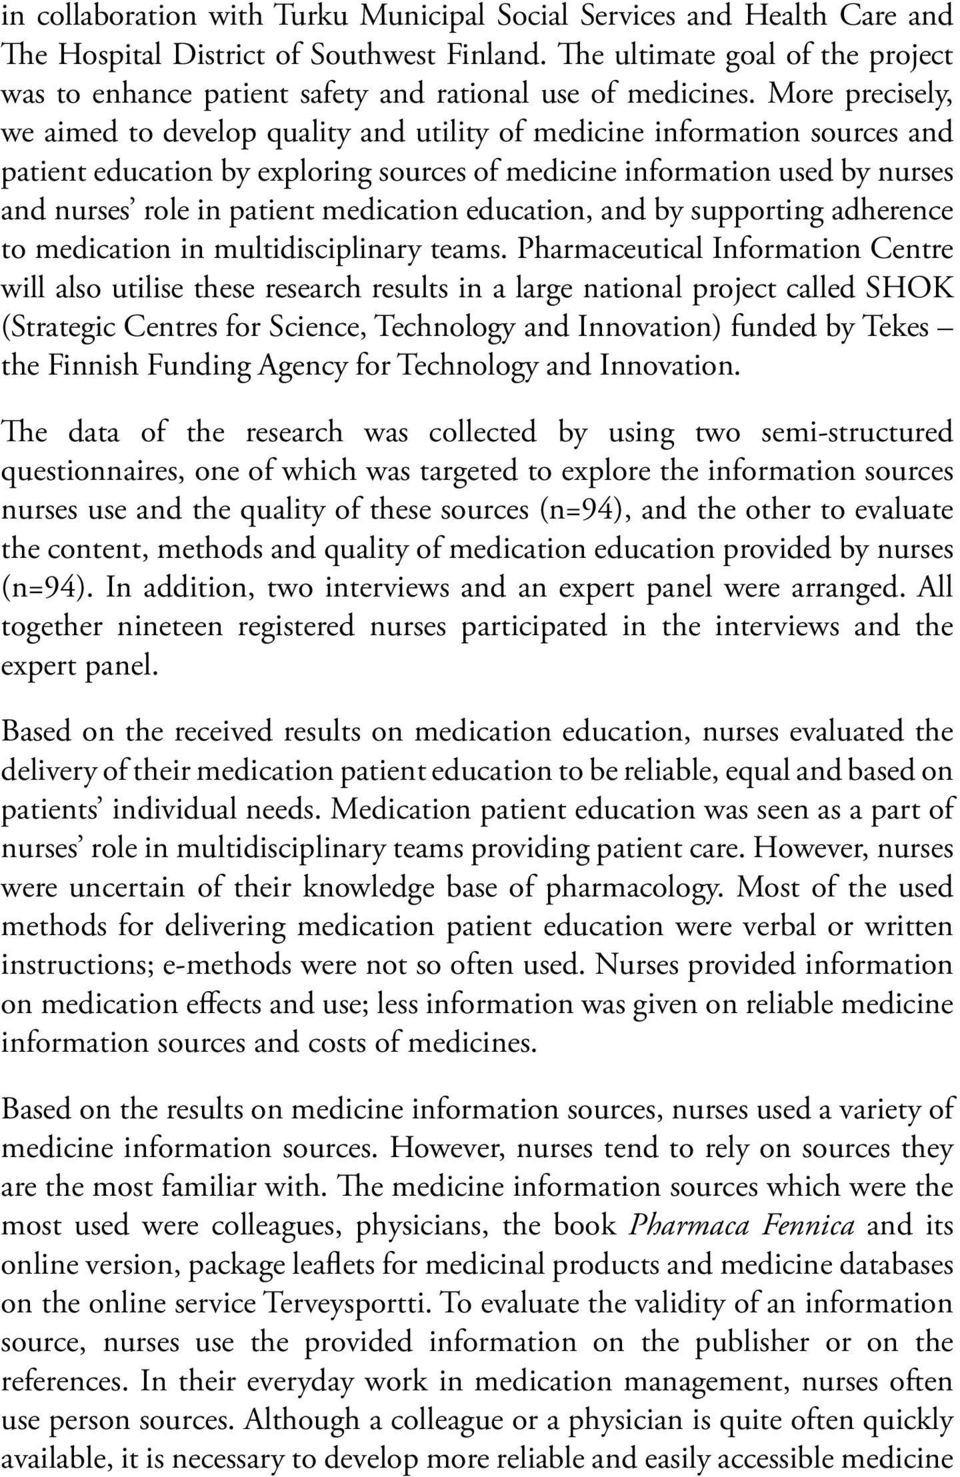 More precisely, we aimed to develop quality and utility of medicine information sources and patient education by exploring sources of medicine information used by nurses and nurses role in patient